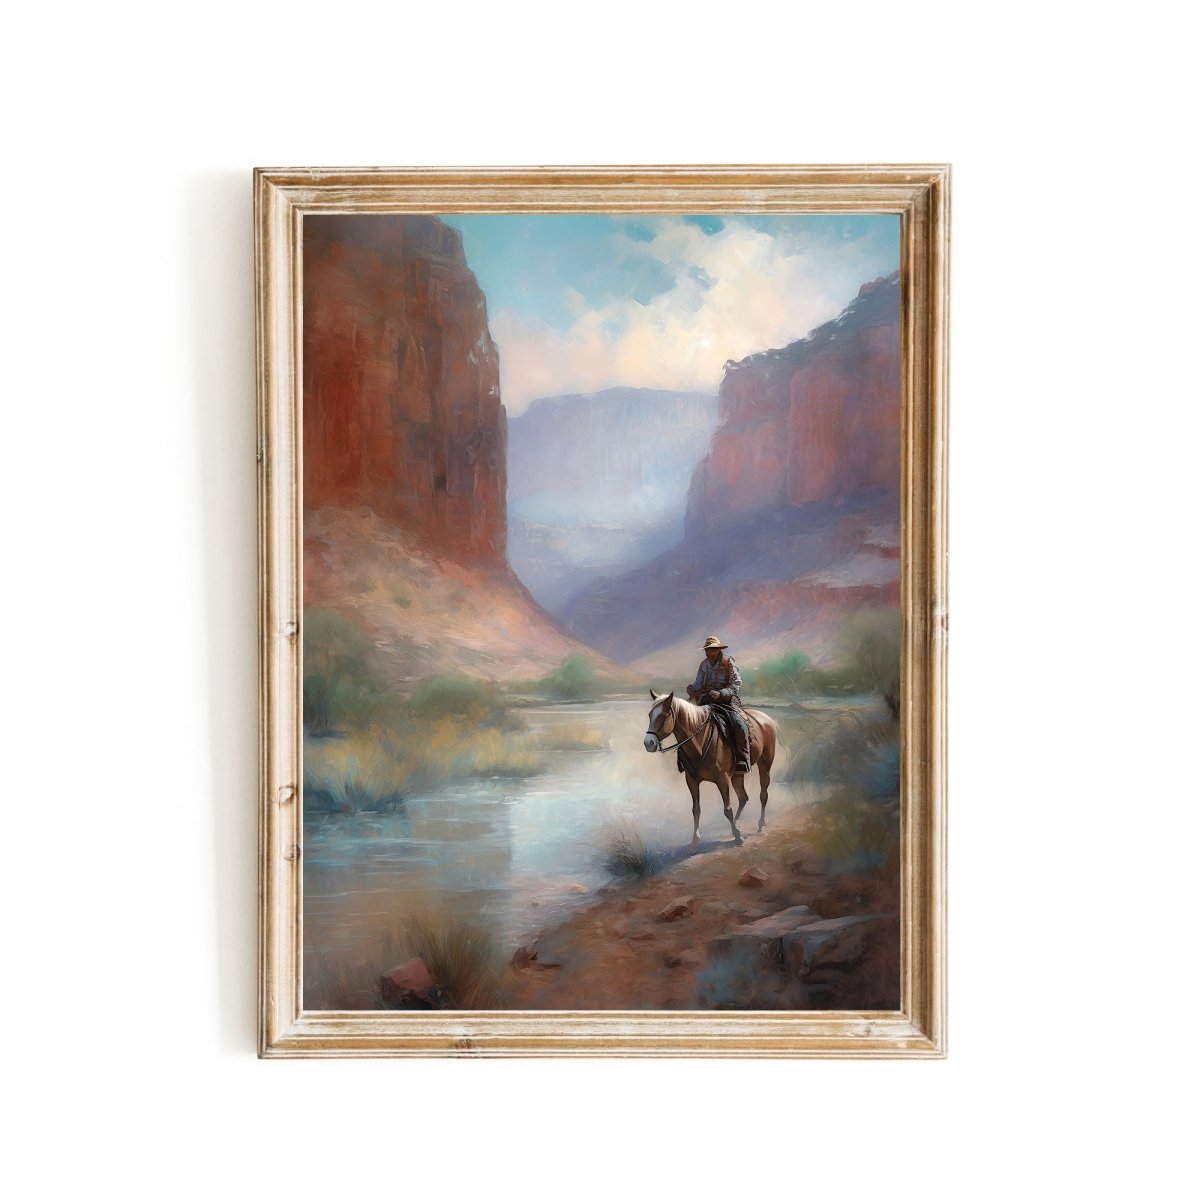 Vintage Wild West Wall Art Lone Rider and Horse Crossing Shallow River between Red Canyons - Everything Pixel